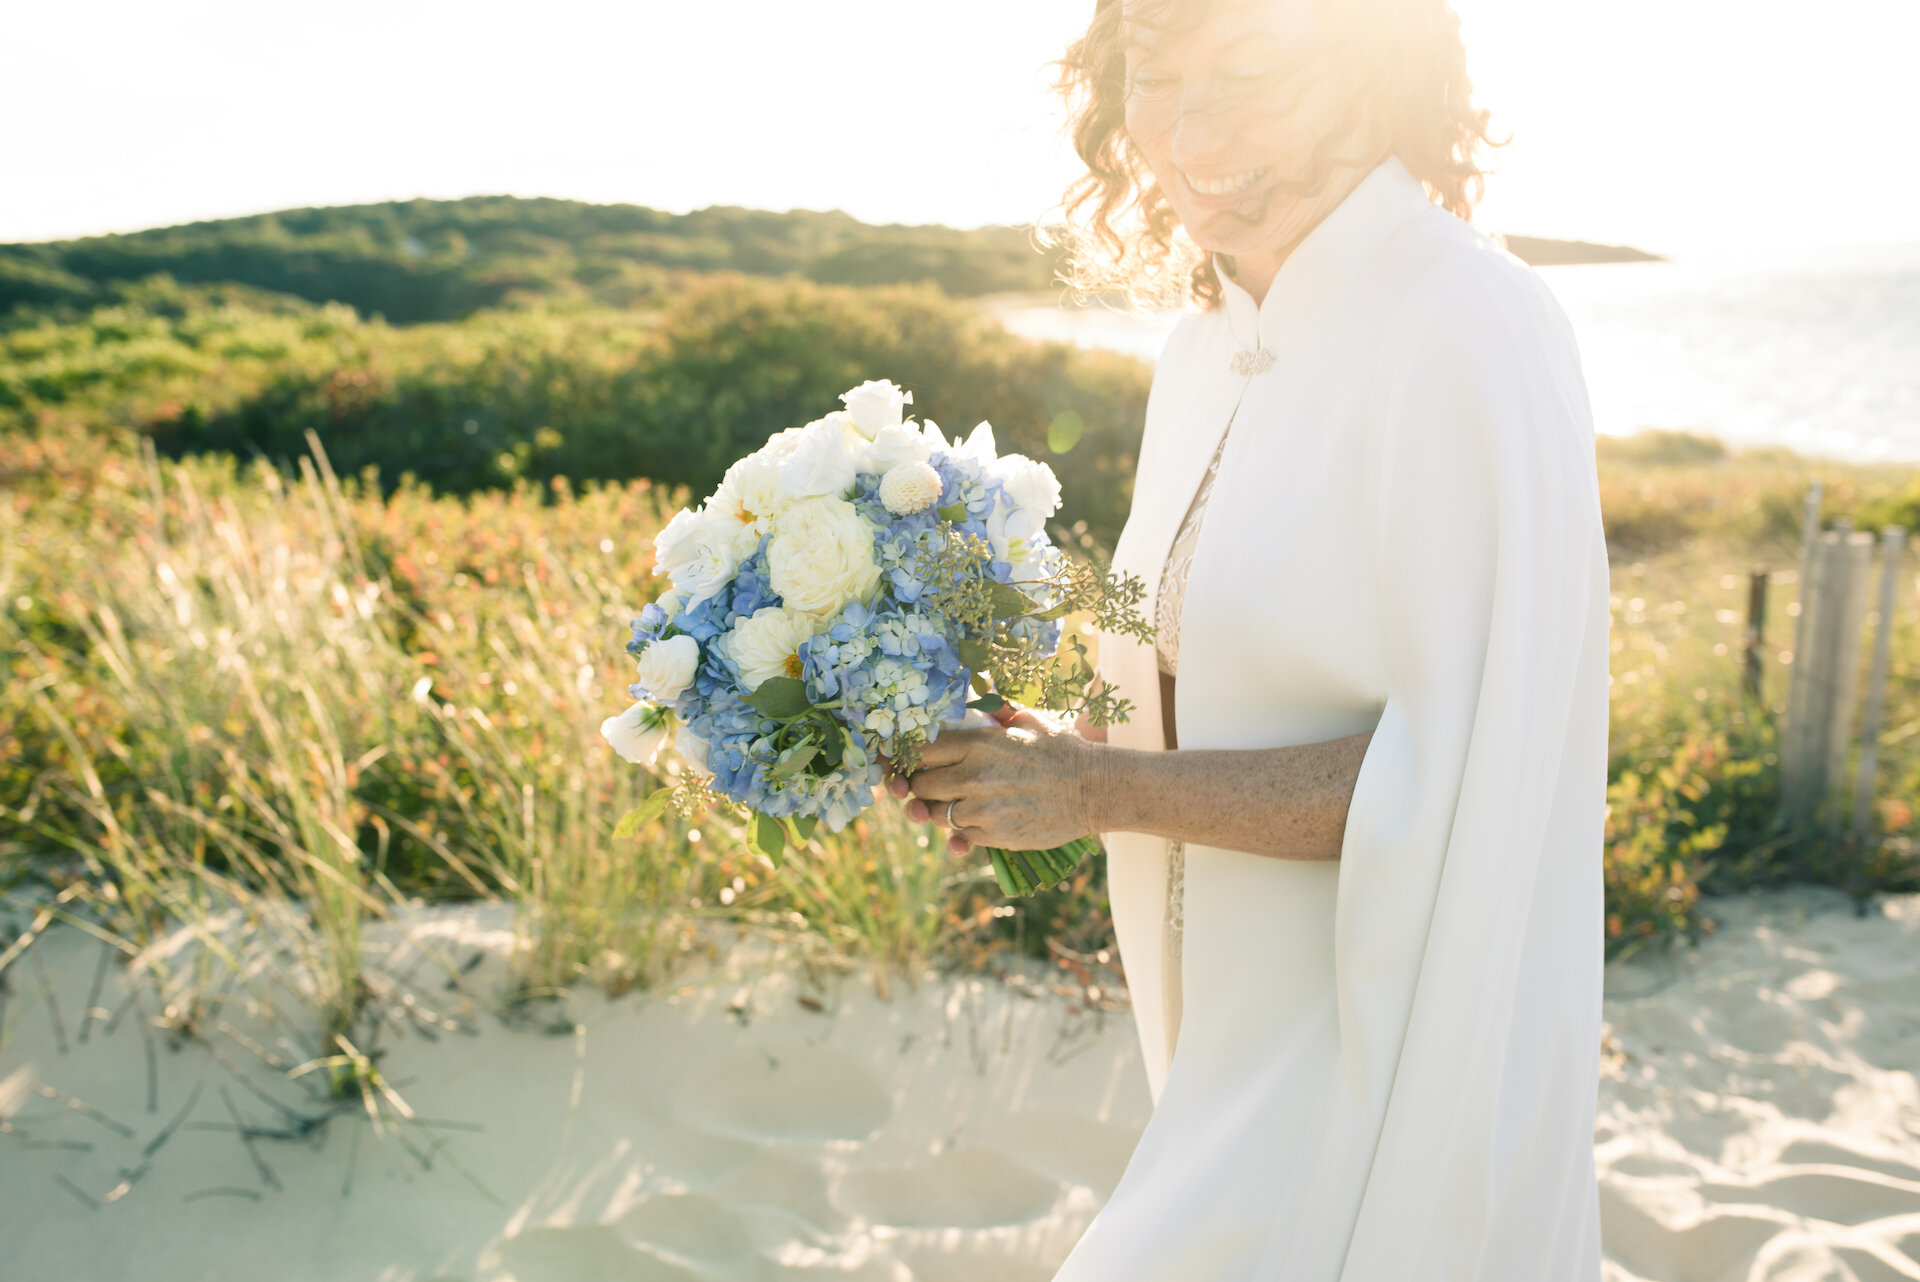 Bride with bouquet of flowers.jpg